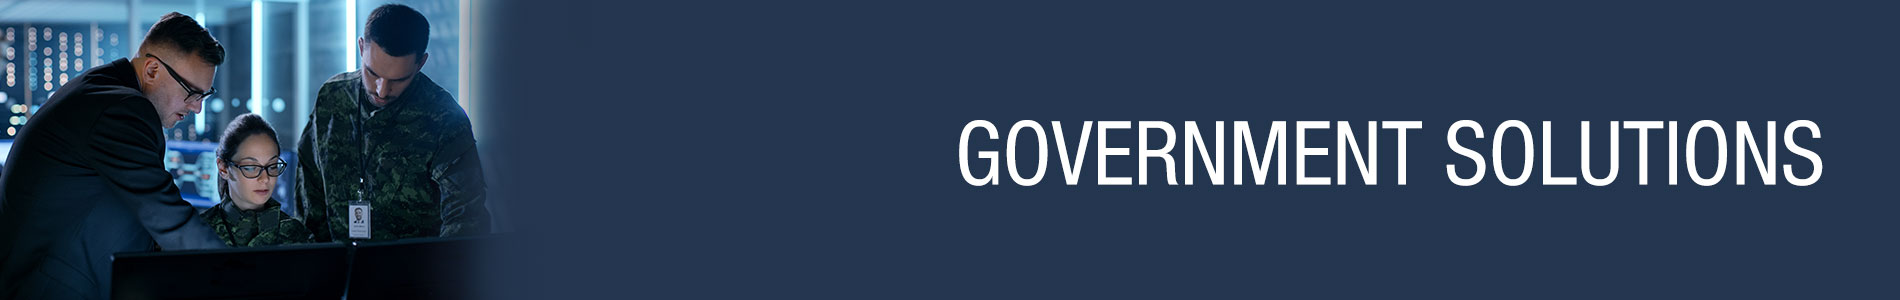 Government Solutions Interior Banner